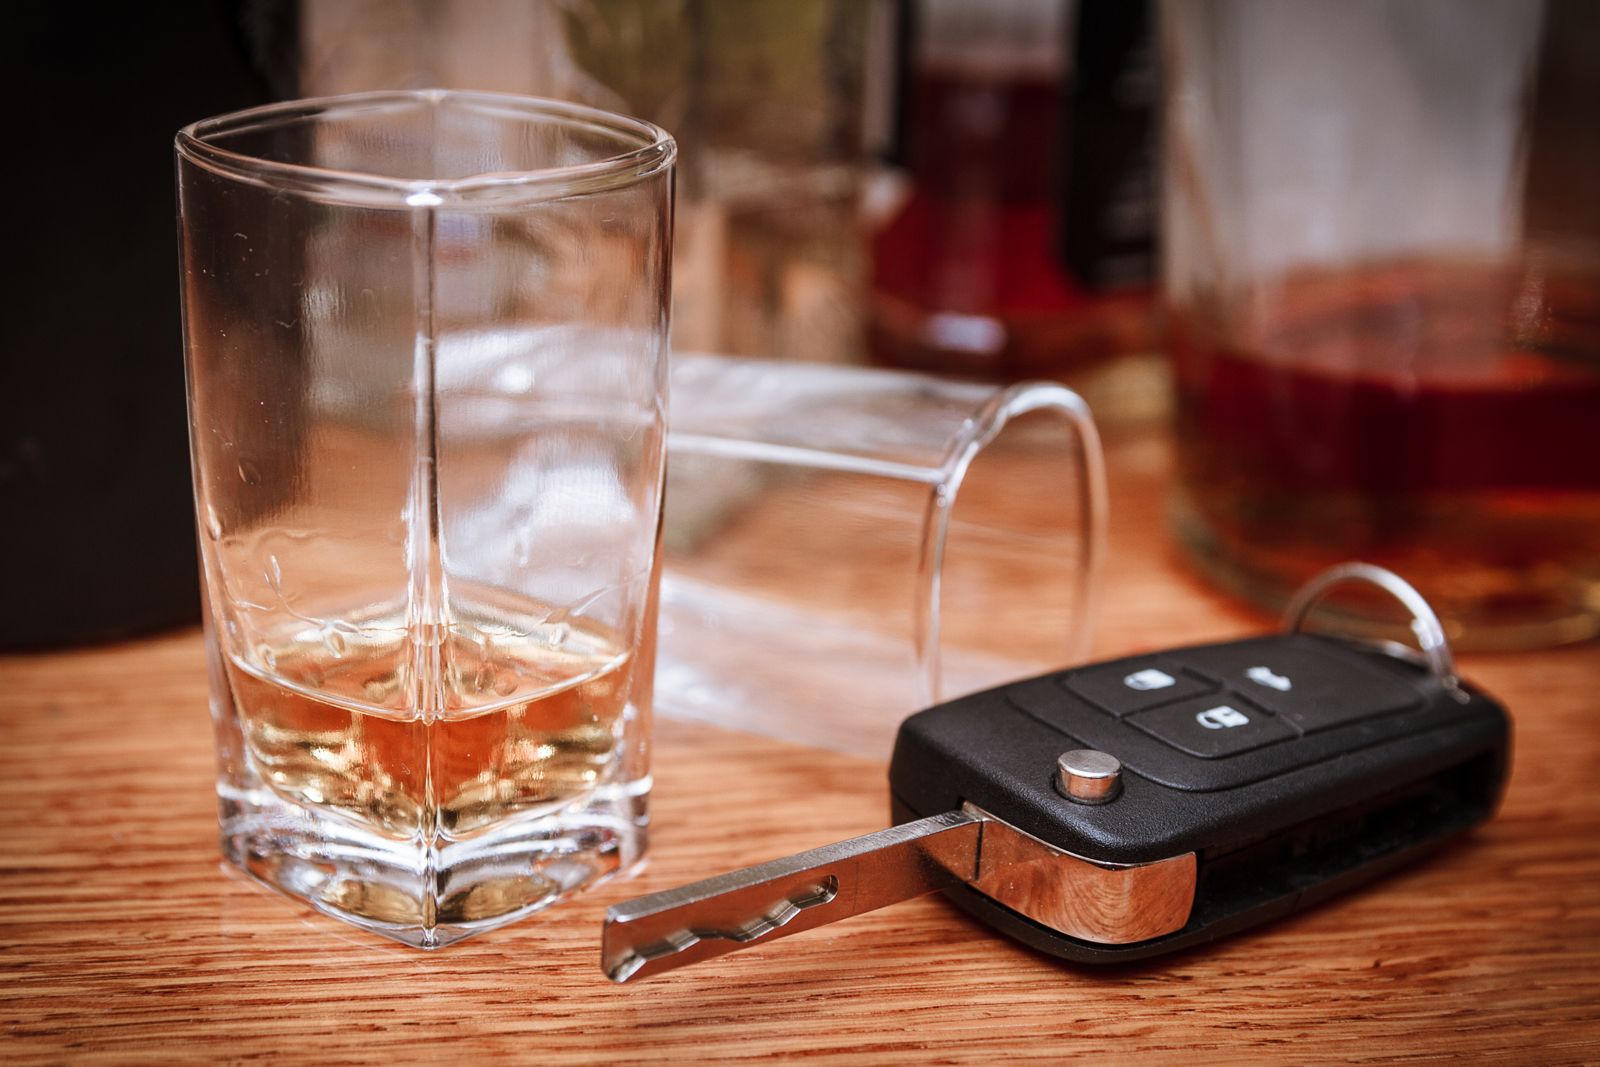 DUI in Davie, Florida Gets Reduced to Reckless Driving Charge by South Florida Defense Attorneys